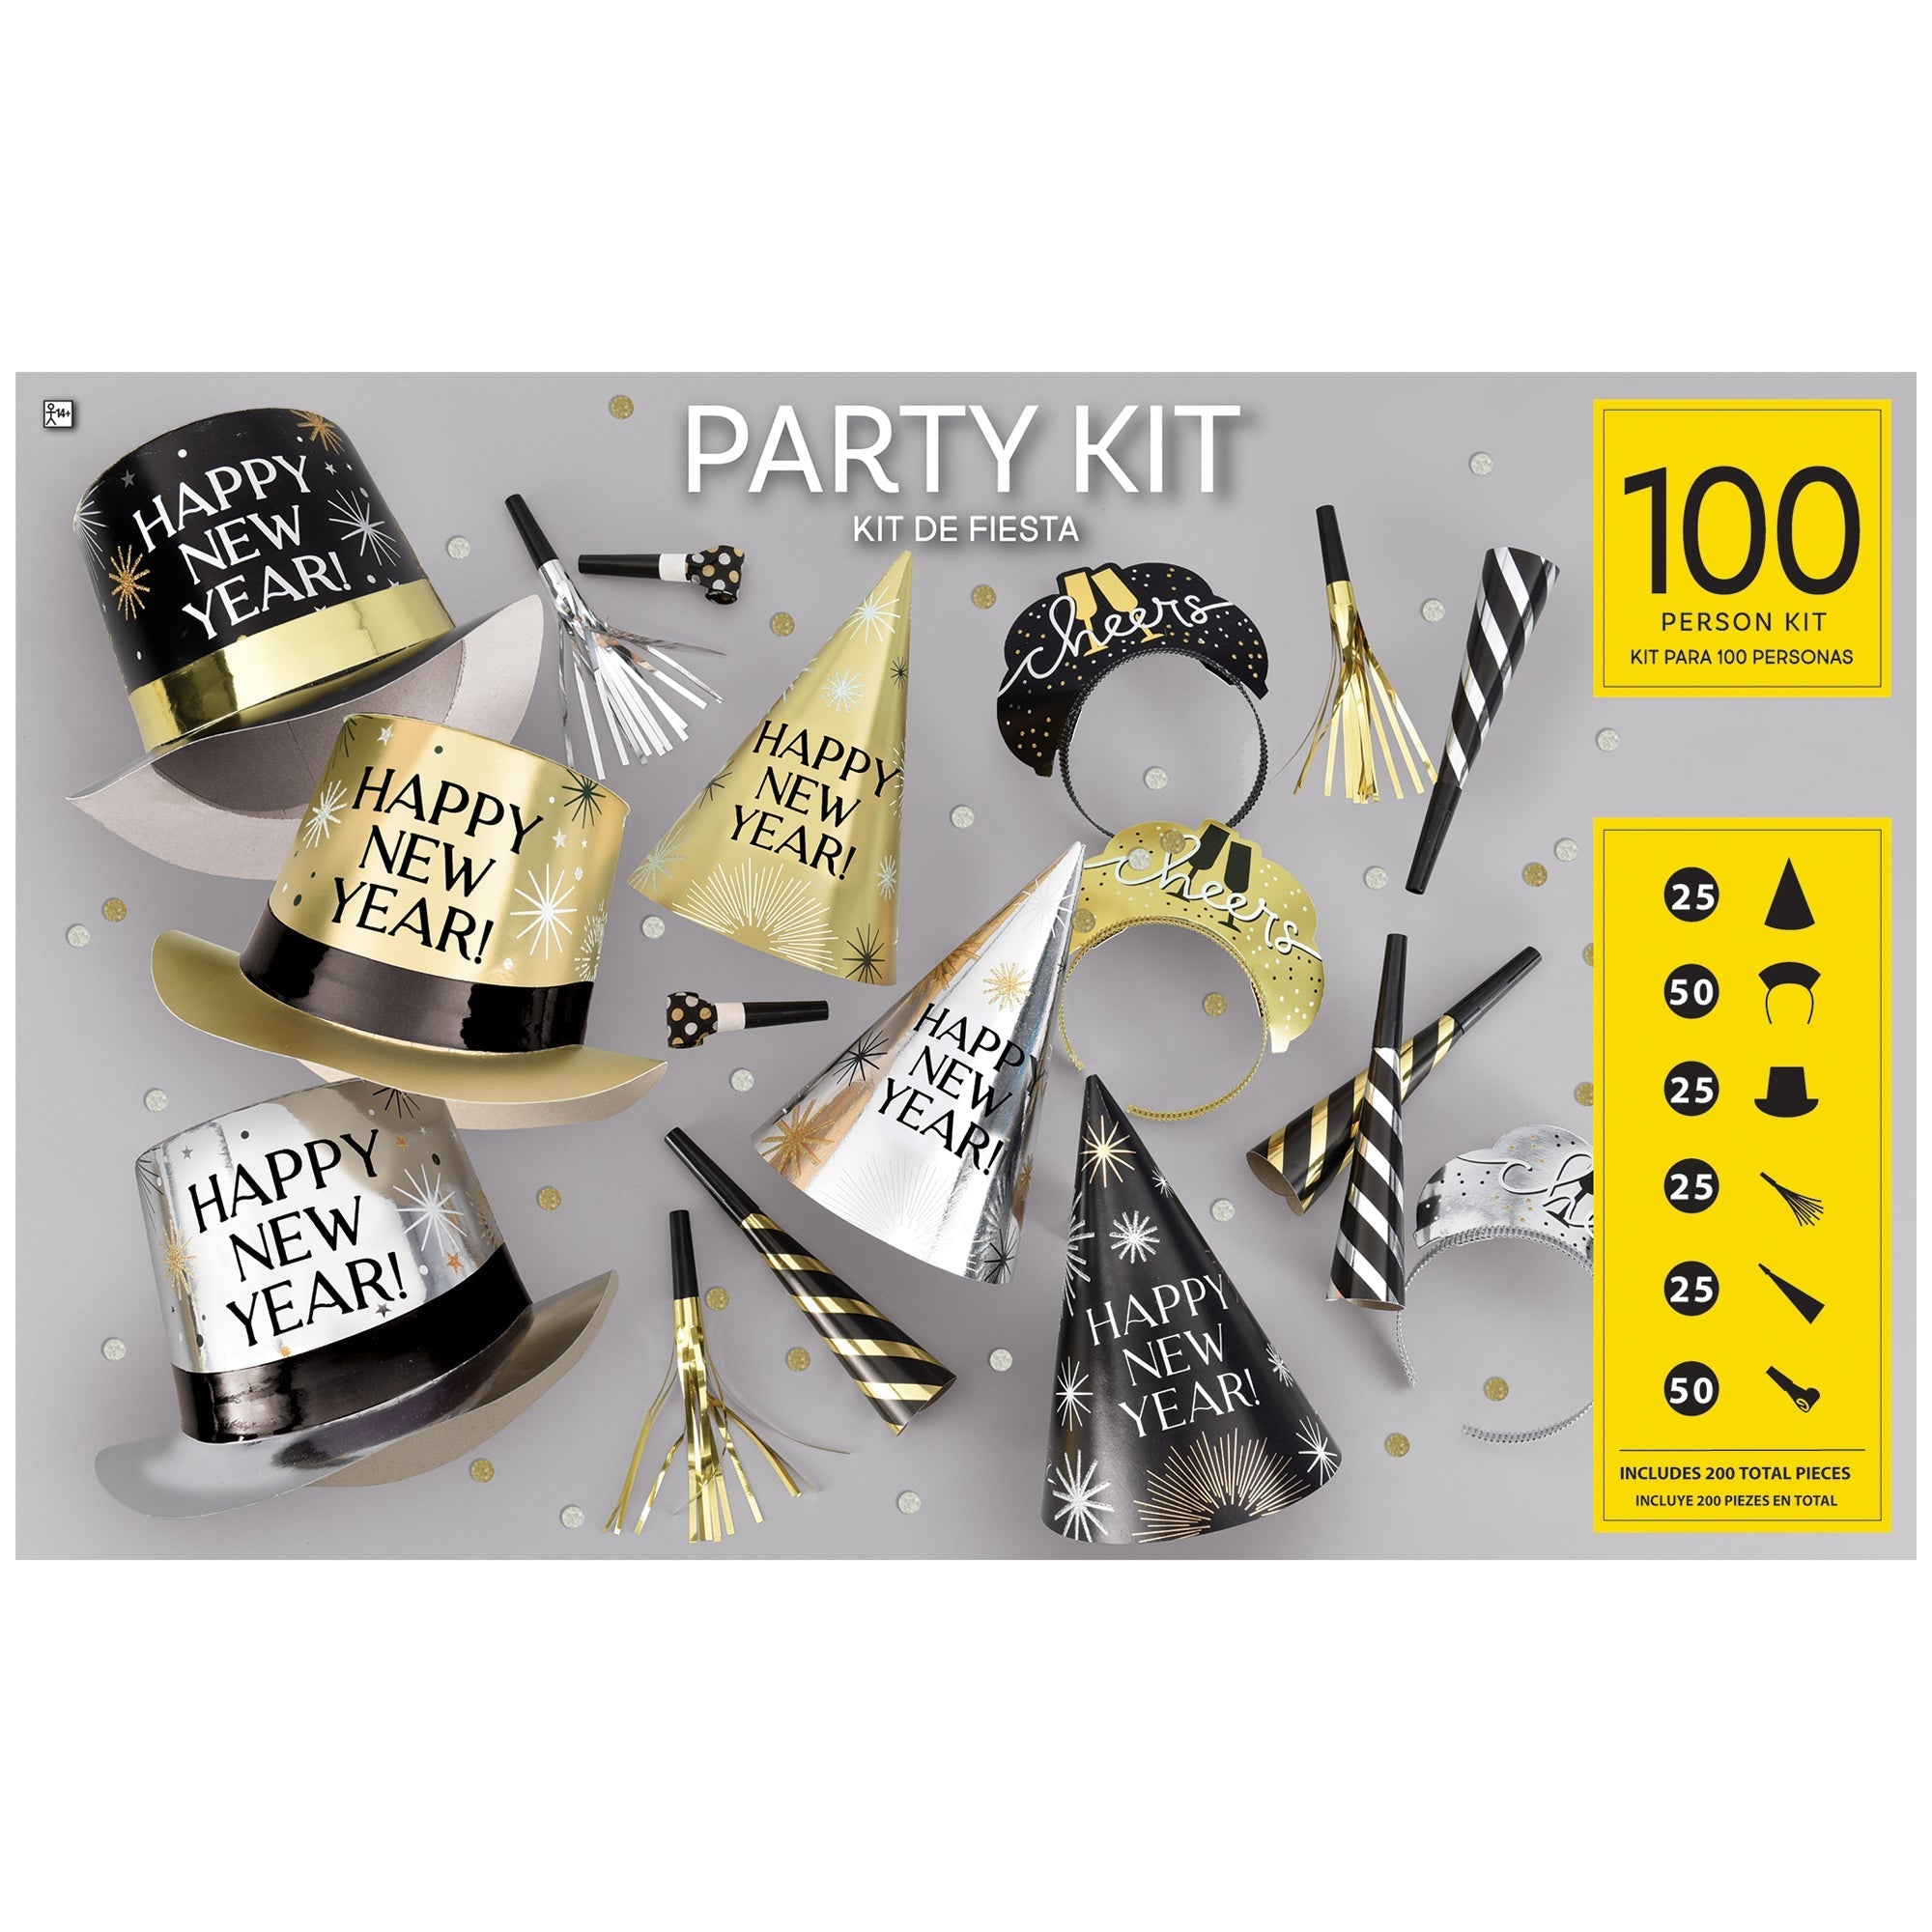 Happy New Year Party Kit for 100 Person, Black, Gold and Silver, 1 Count